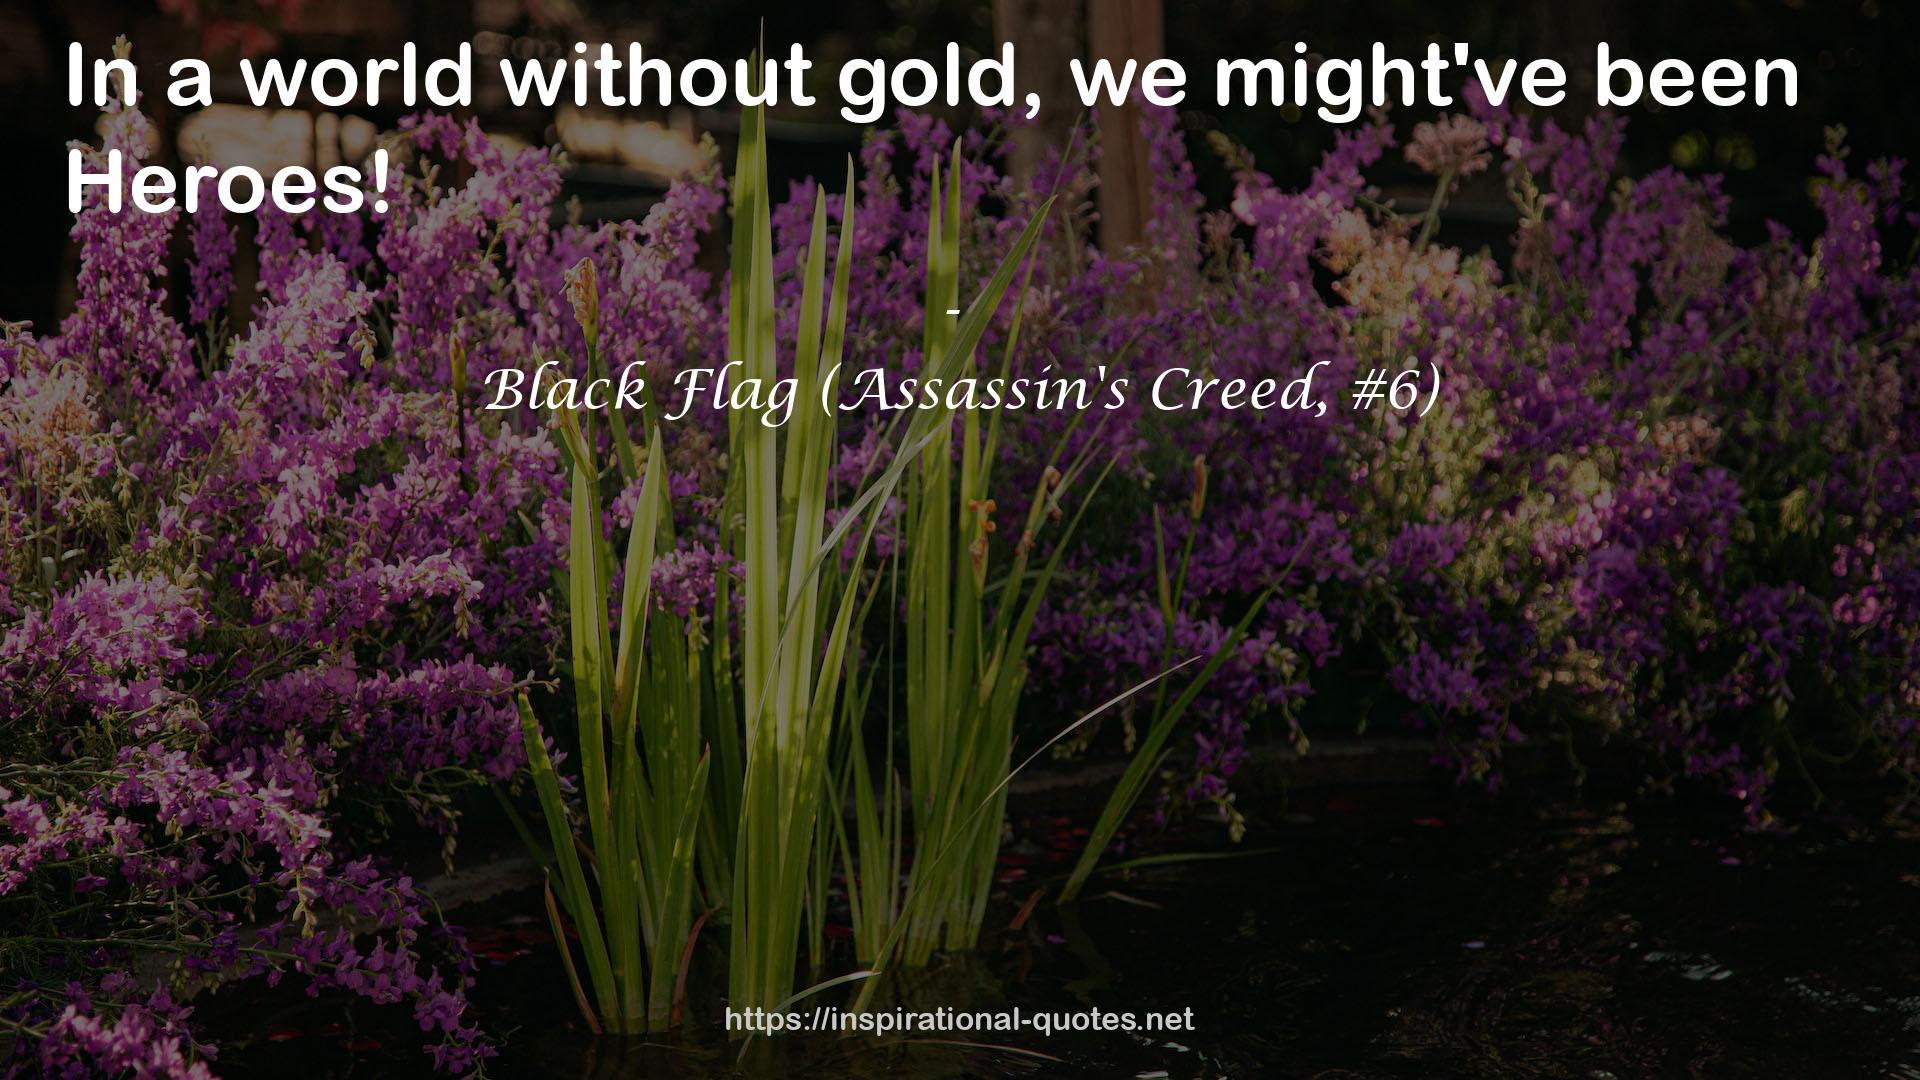 Black Flag (Assassin's Creed, #6) QUOTES